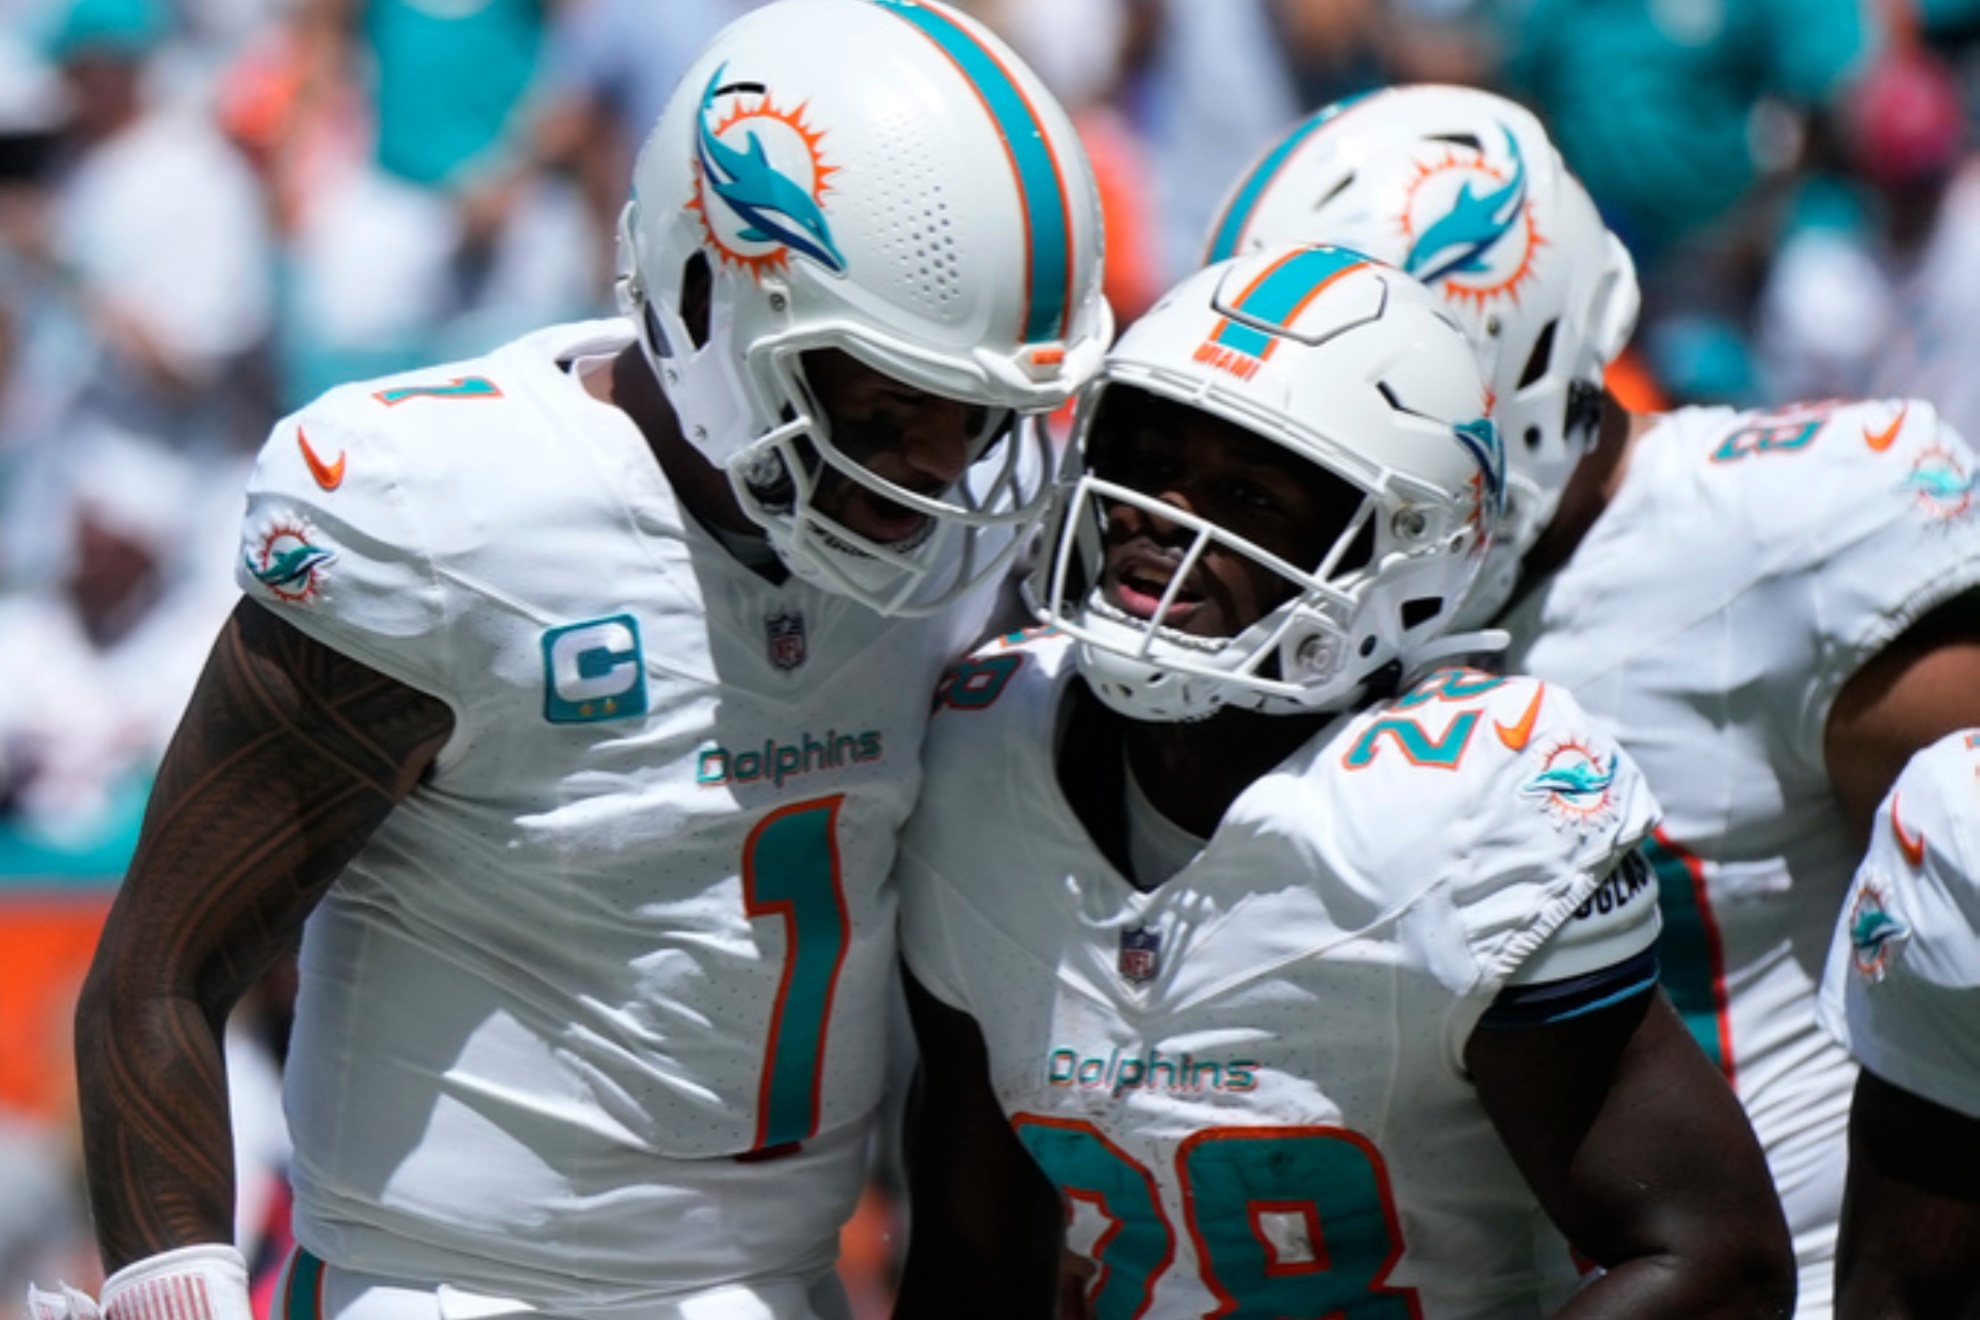 The Dolphins scored 70 points against the Denver Broncos